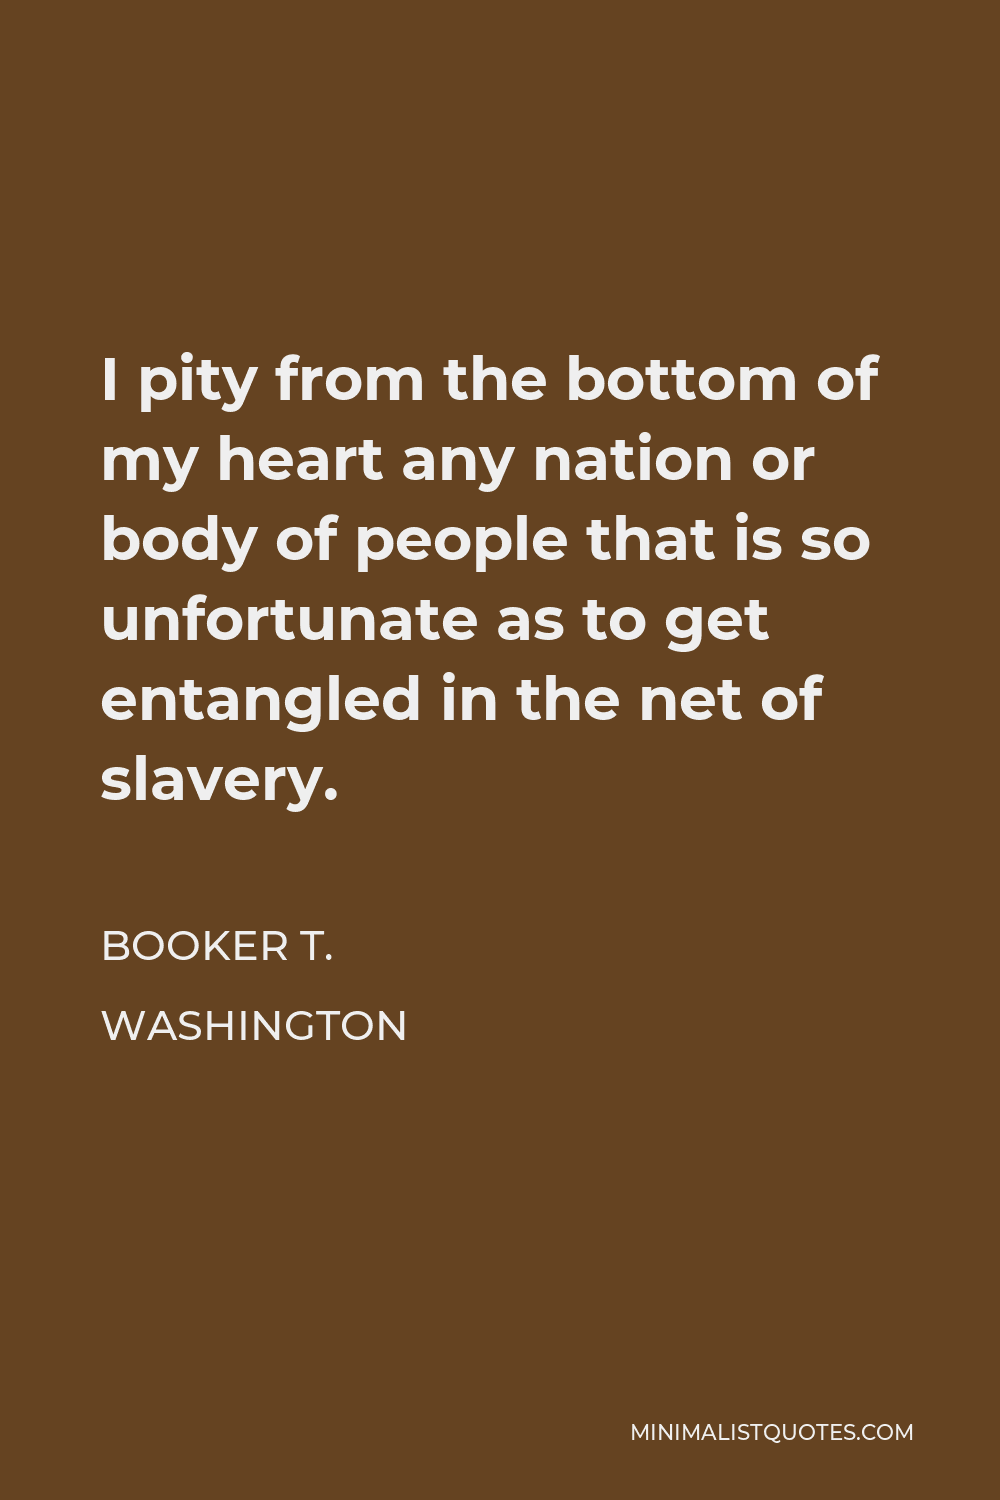 Booker T. Washington Quote - I pity from the bottom of my heart any nation or body of people that is so unfortunate as to get entangled in the net of slavery.